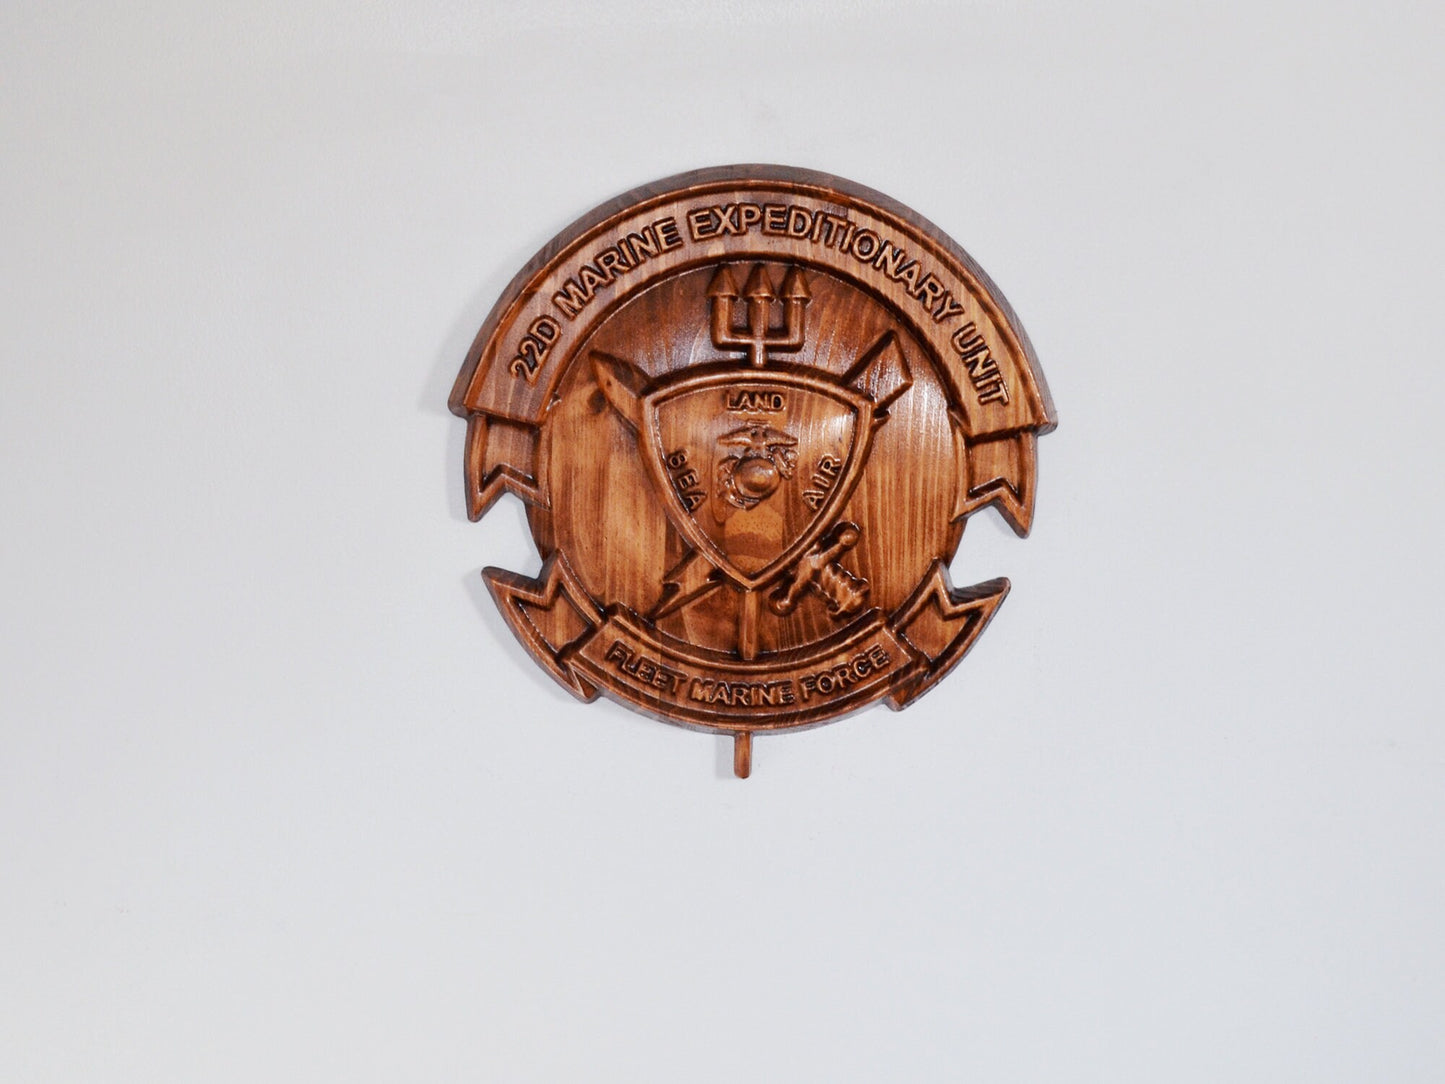 USMC 22nd Marine Expeditionary Unit, stained 3d wood carving, military plaque